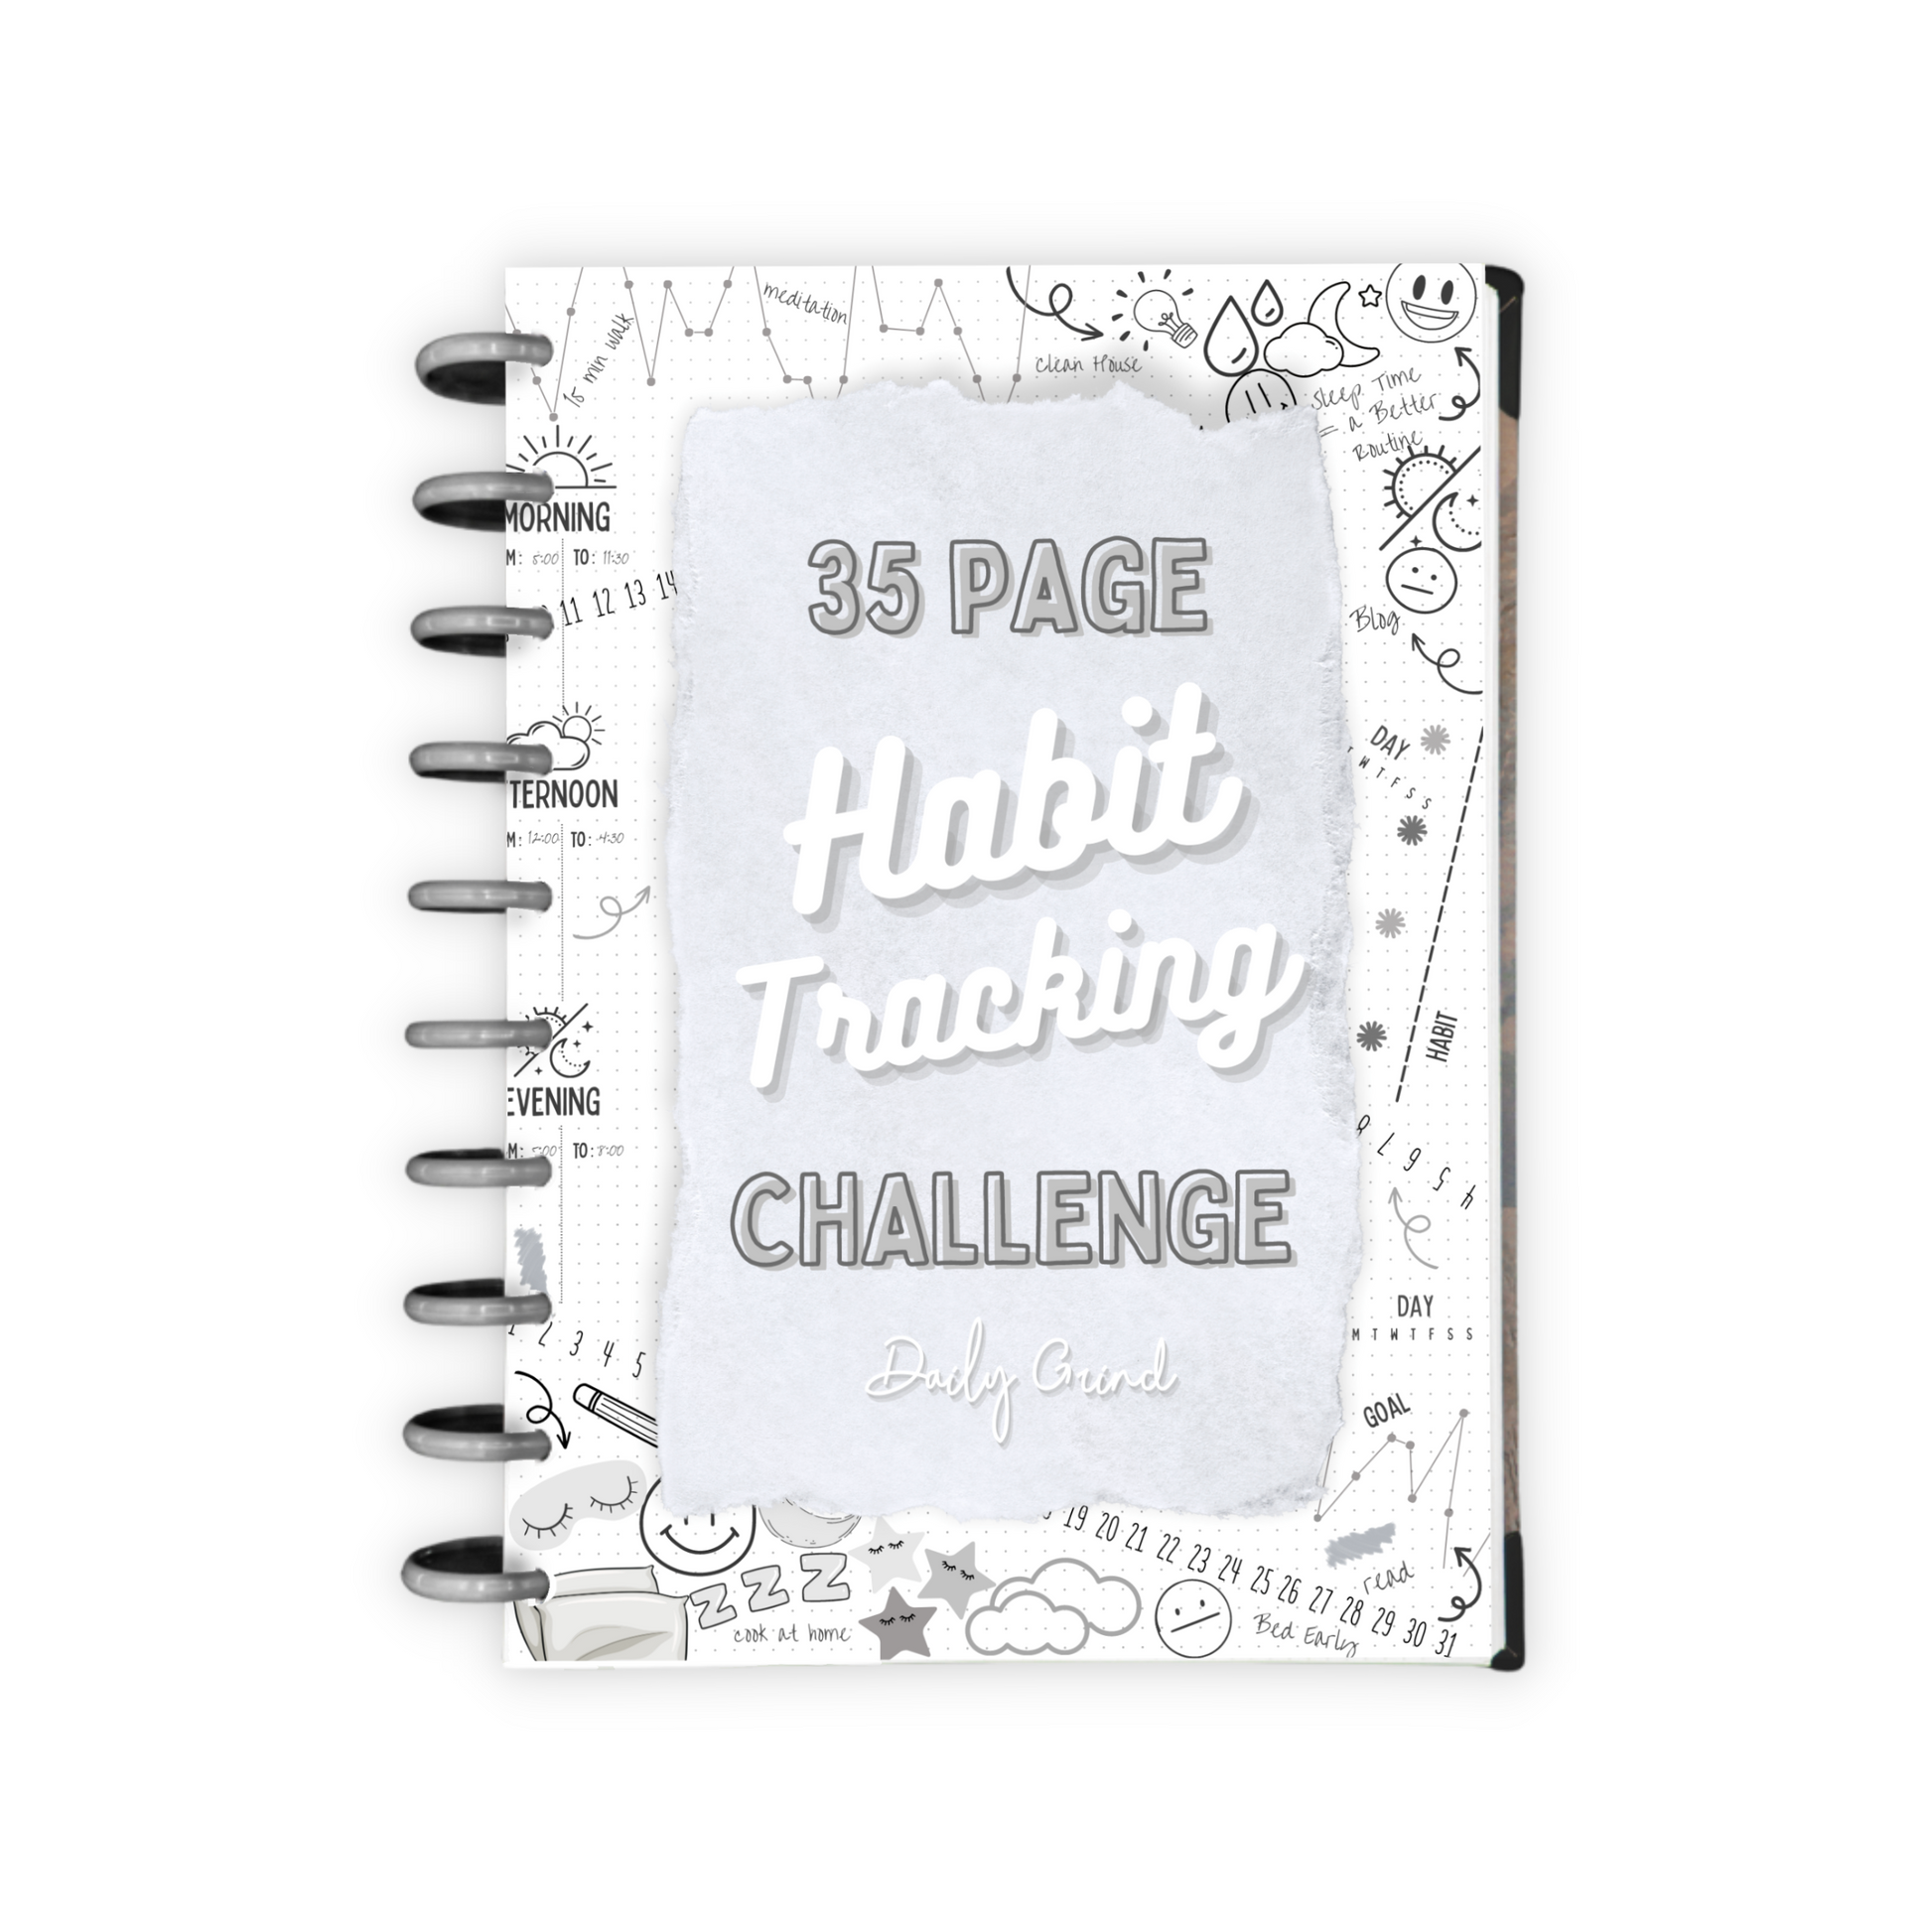 Black and white "35 Page Habit Tracking Challenge" page